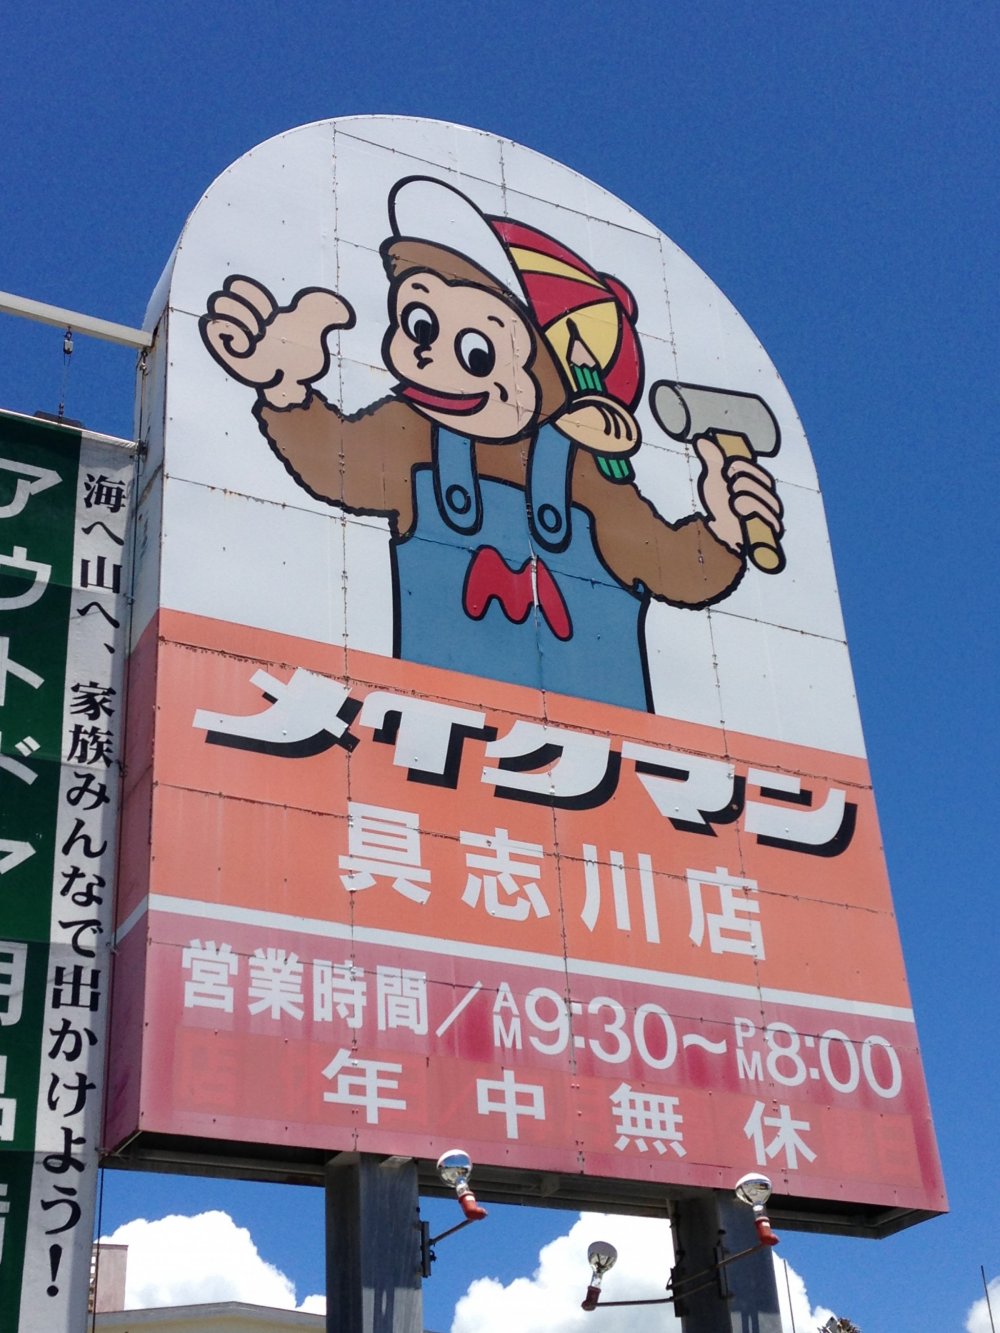 Make Man's stores can be easily identified by the monkey on its signs